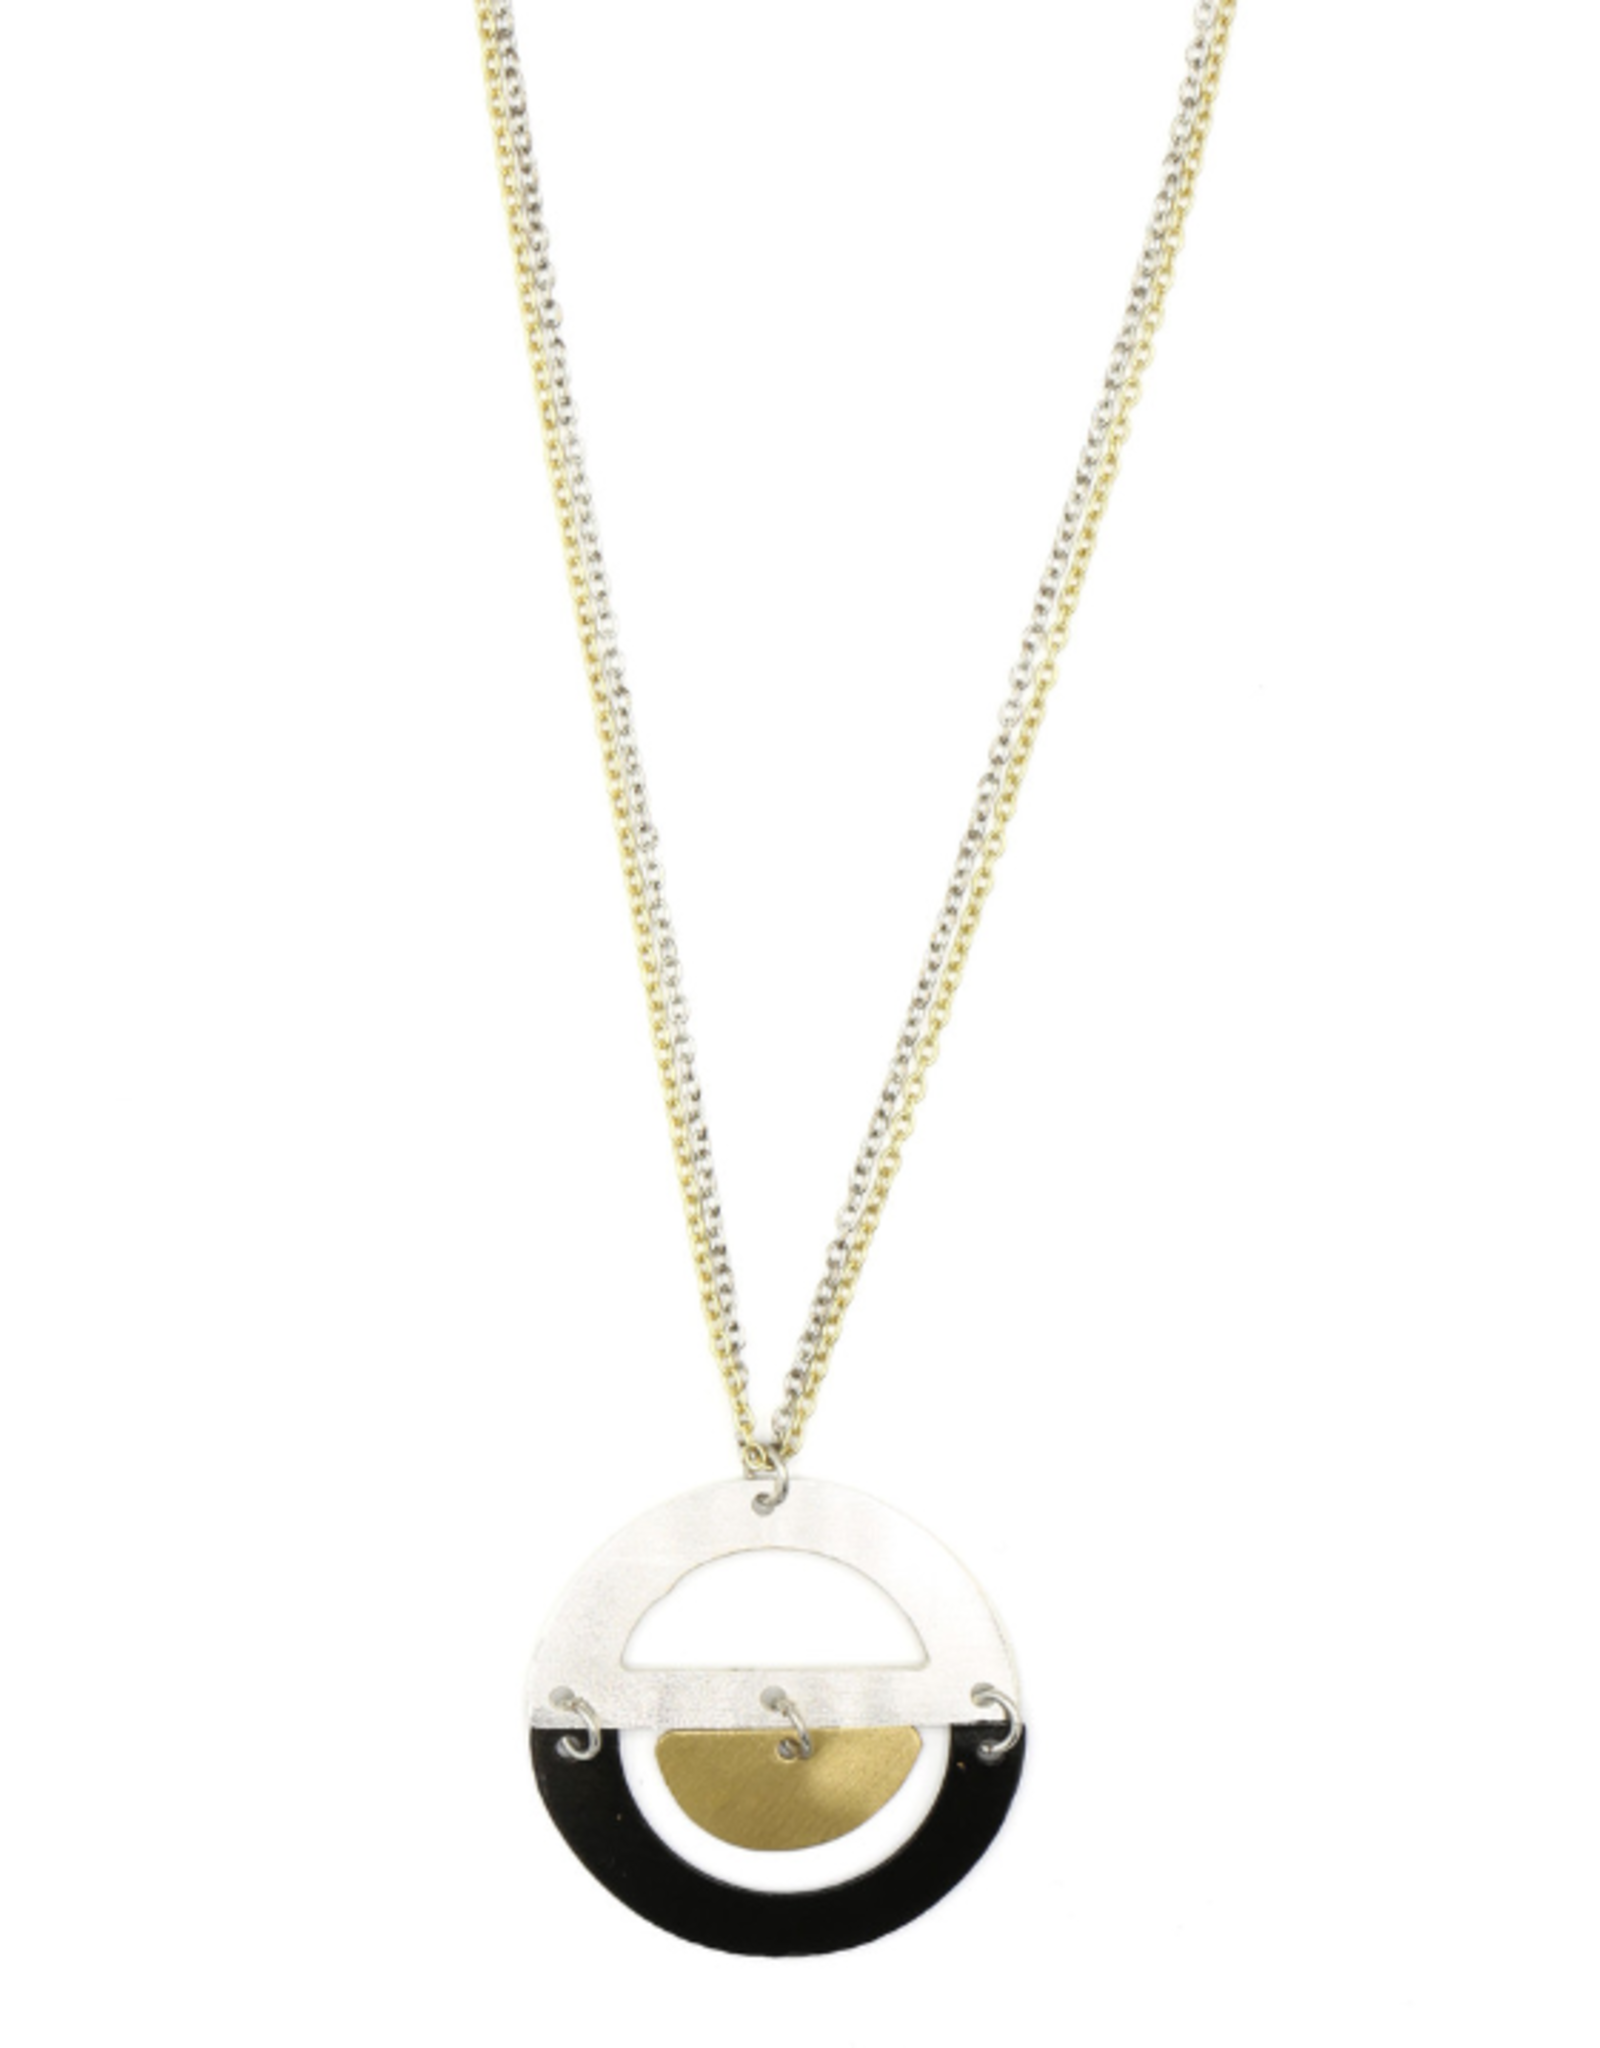 India CLEARANCE Galactic Pendant Necklace, India